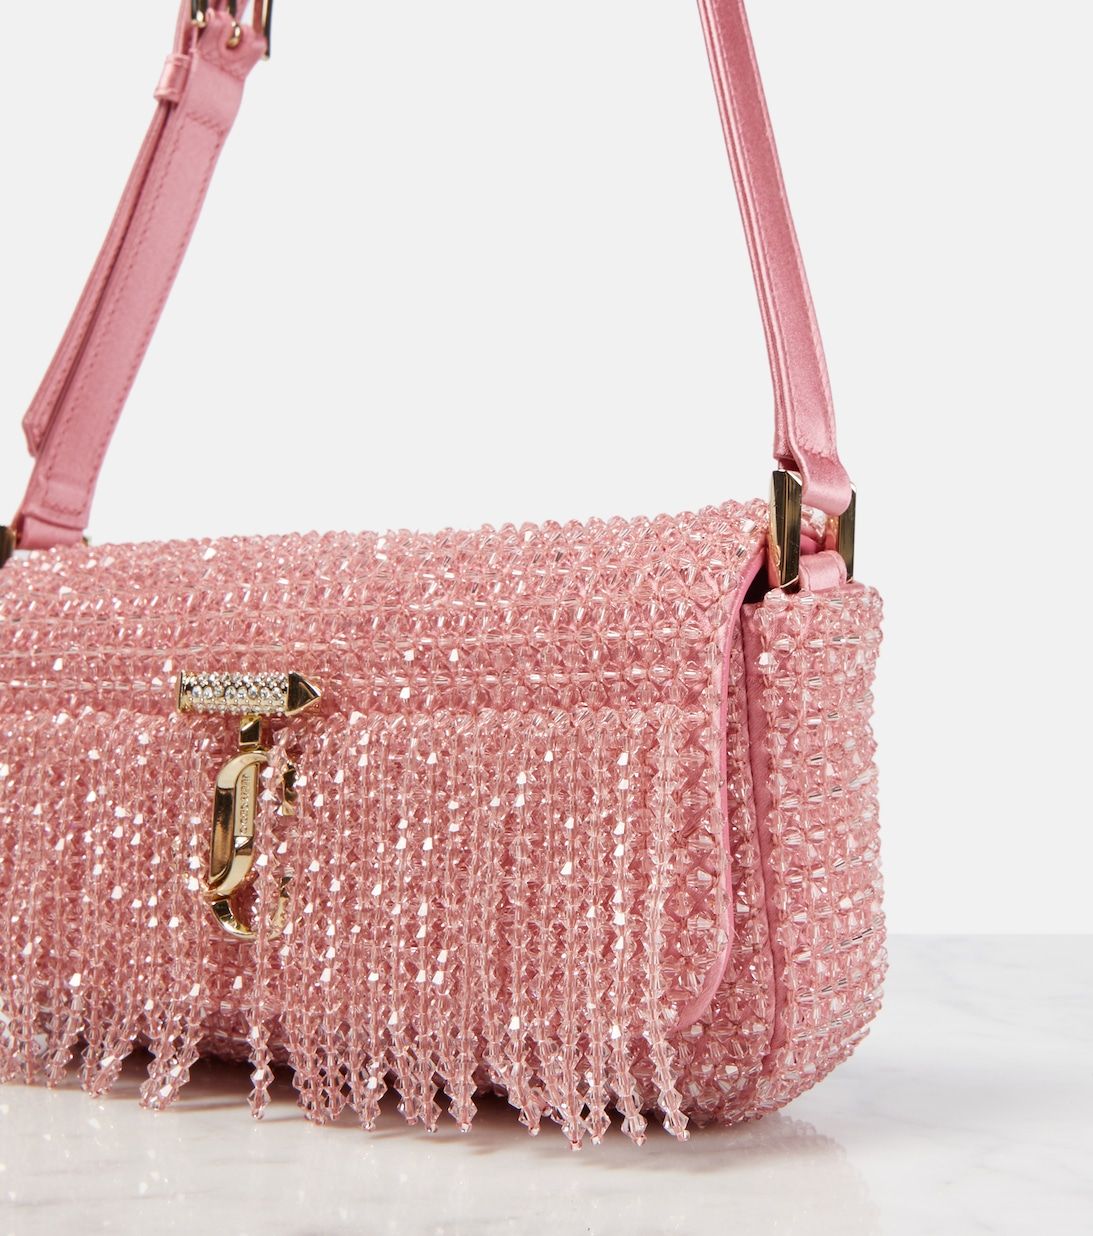 Luxury Must-Have: Elevate Your Look with Jimmy Choo Bags